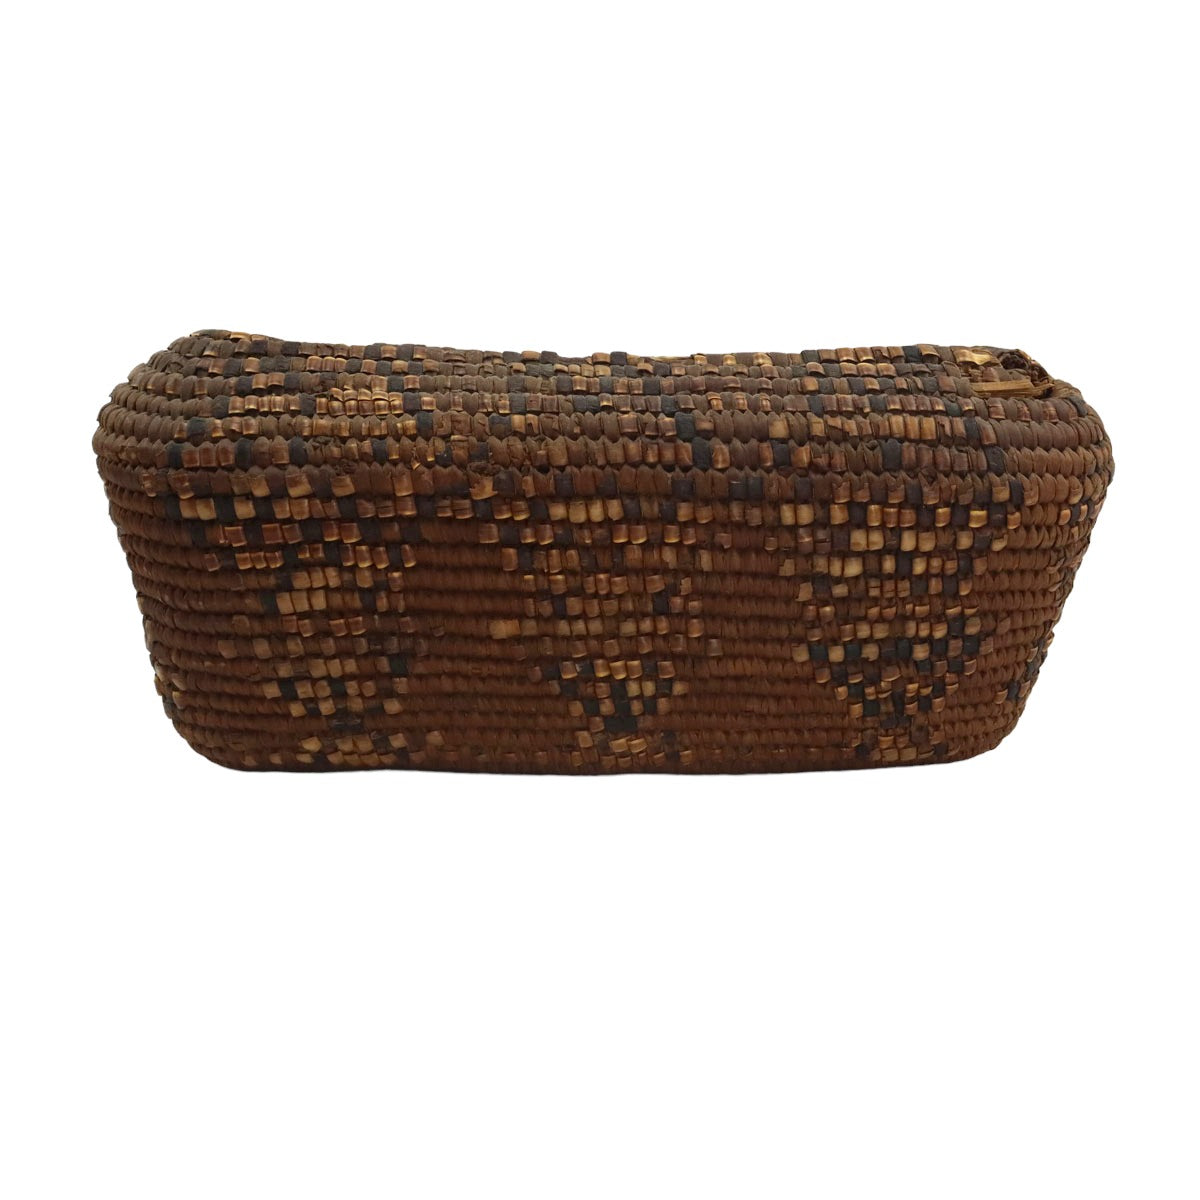 Thompson River Imbricated Basket c. 1880-90s, 4.5" x 10.5" 7.5" (SK3318) 1